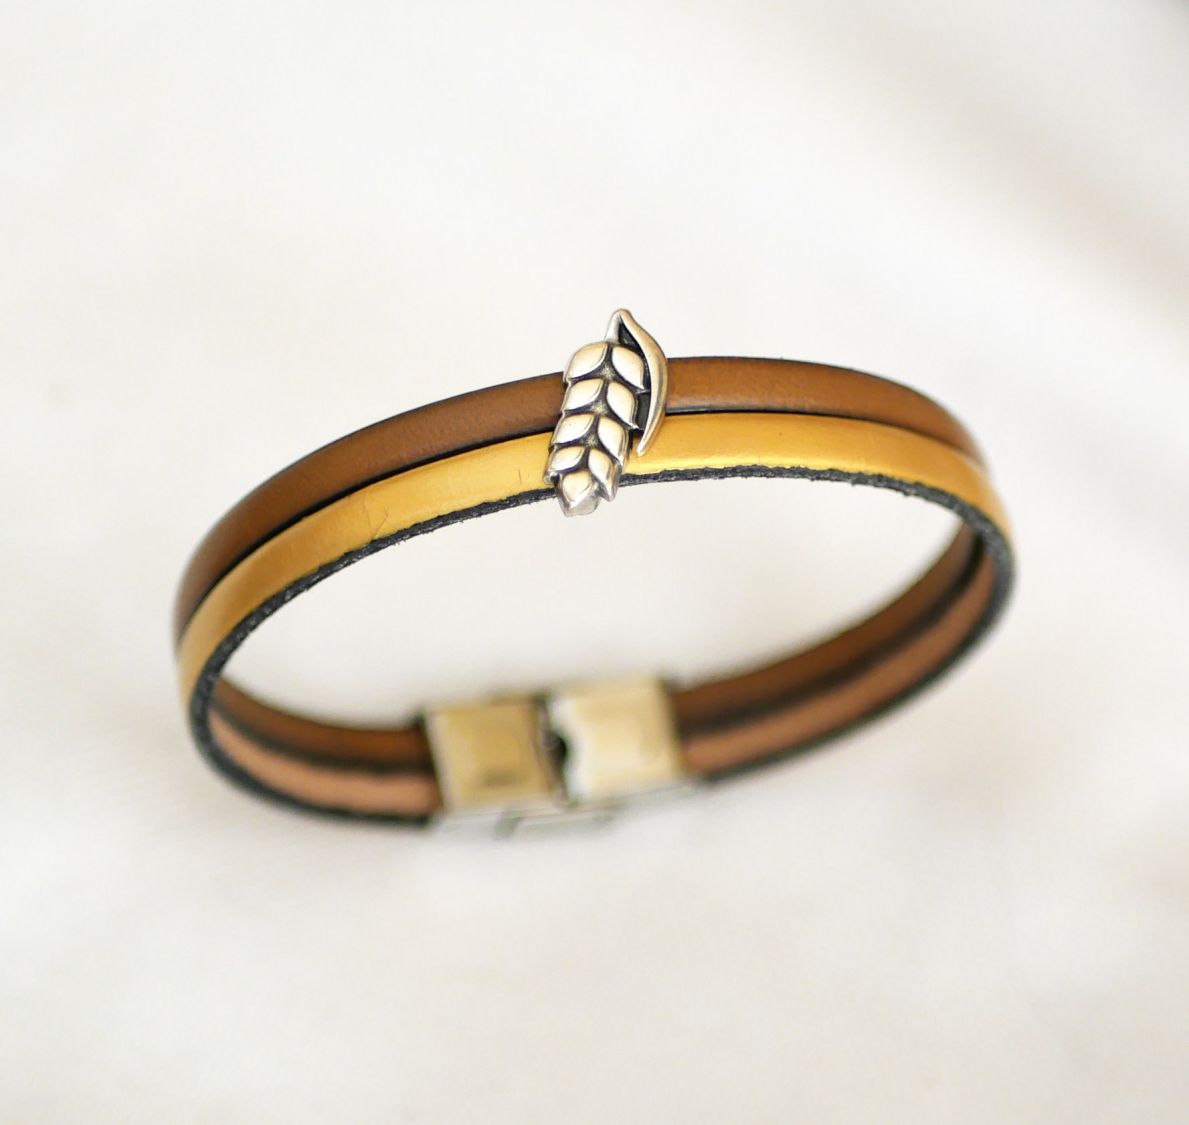 Bracelet duo of leather and wheat ear customizable, wedding of wheat man and woman